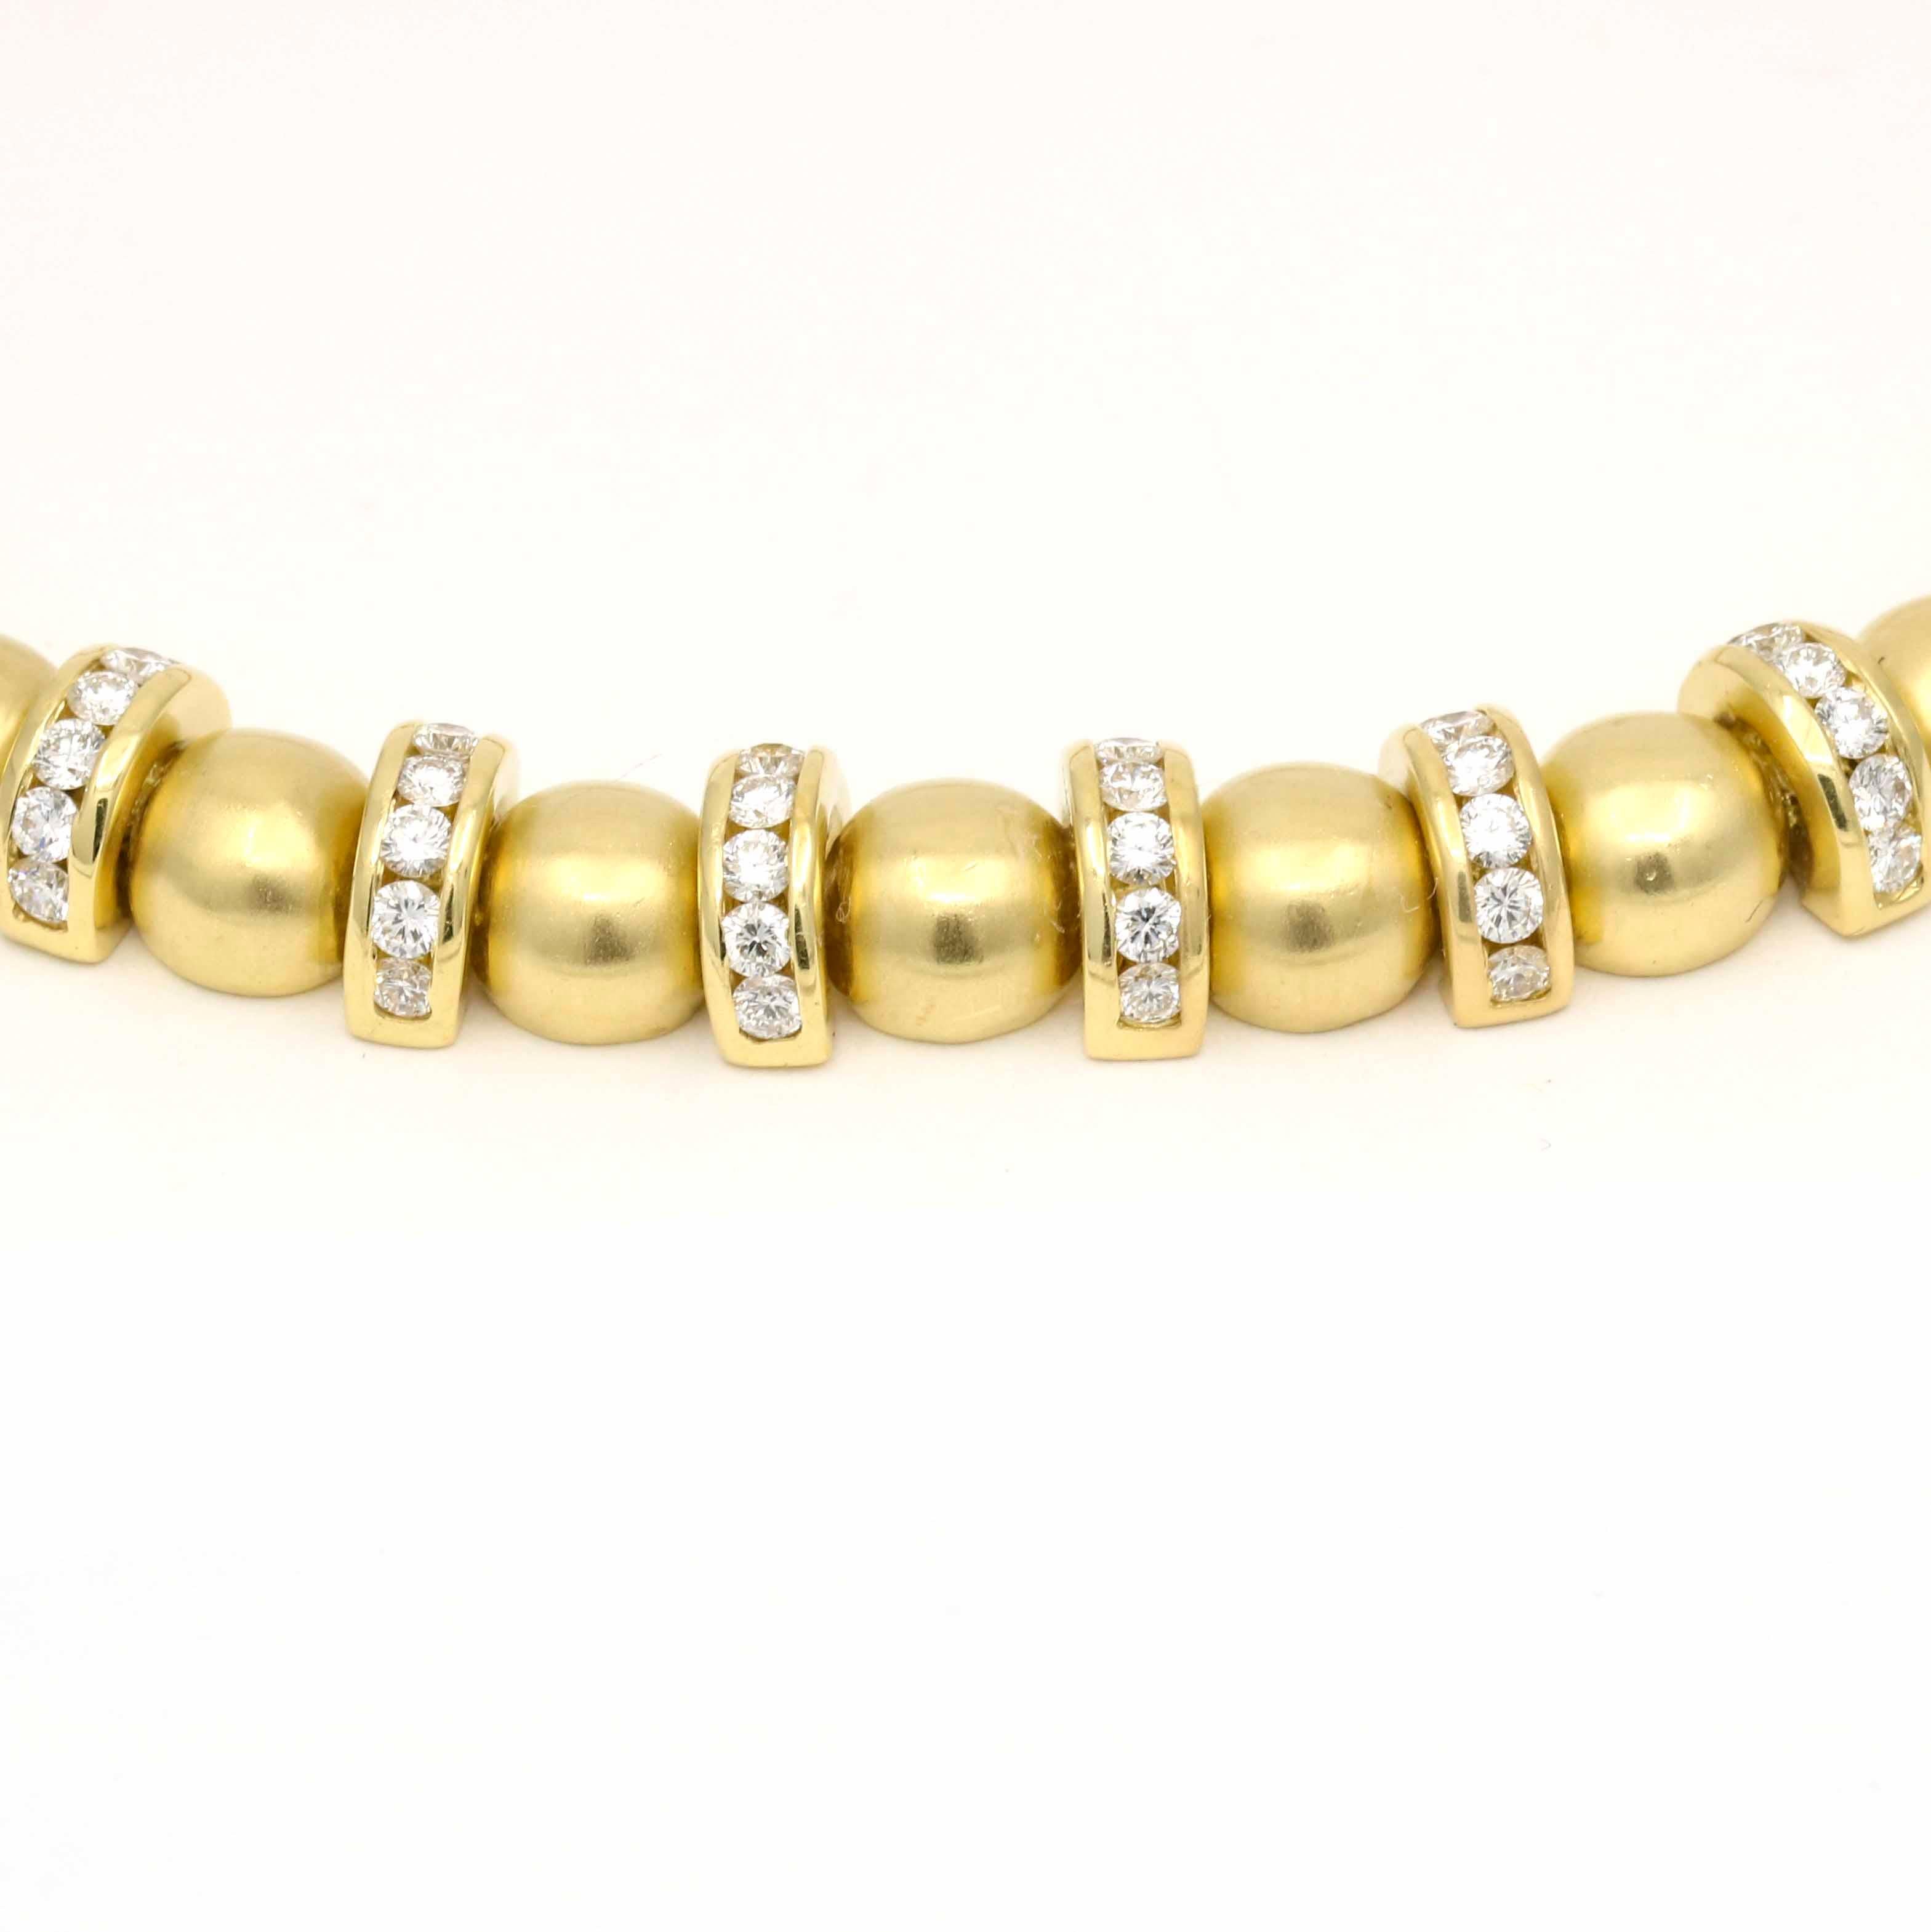 Round Cut Charles Krypell Diamond 18k Yellow Gold Bead Choker Necklace, '13.50 Cttw'